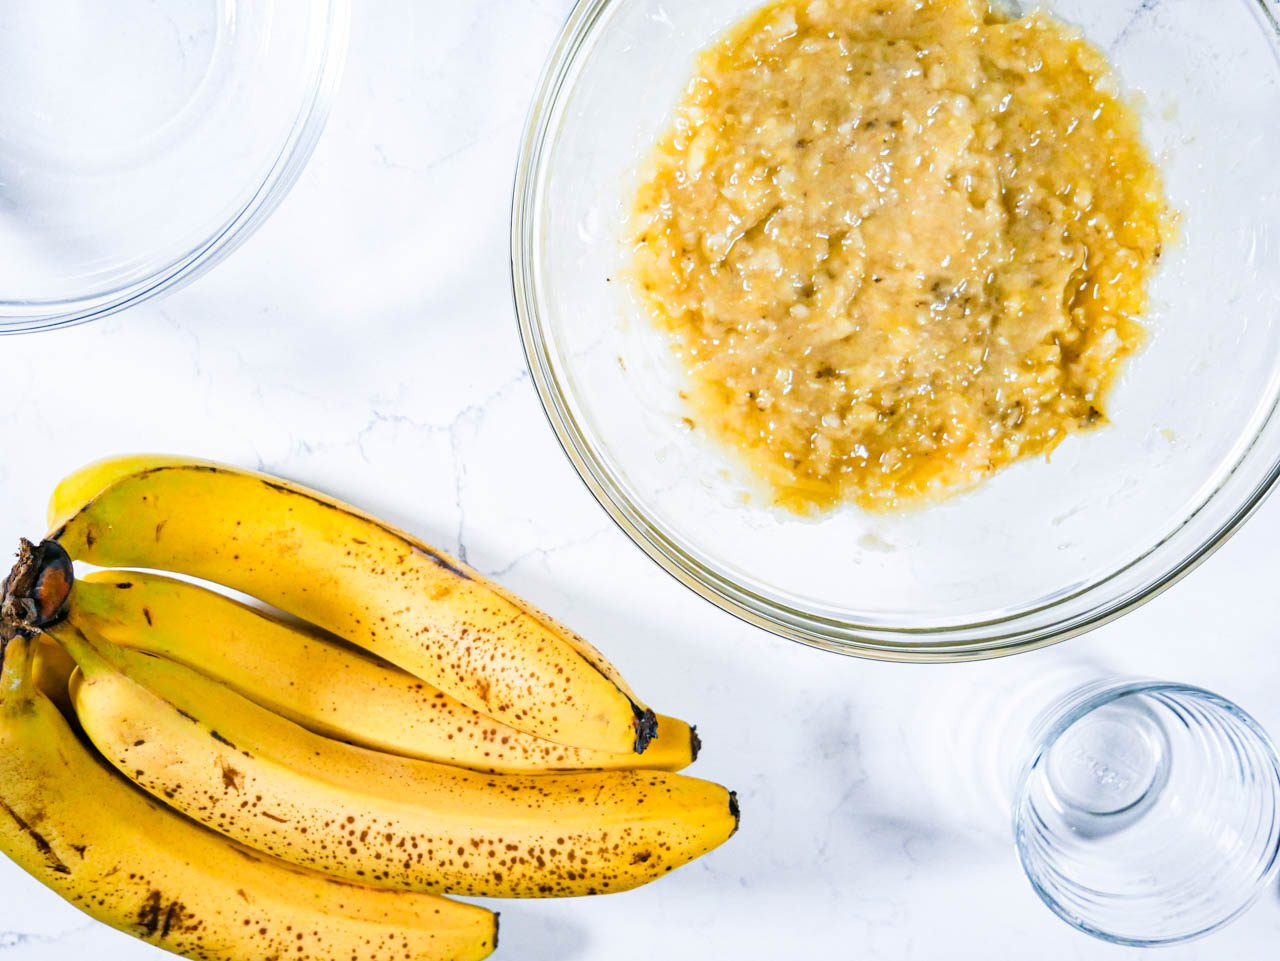 Mashed bananas in a clear bowl on a white countertop surrounded by other clear bowls and a ripe banana bunch.